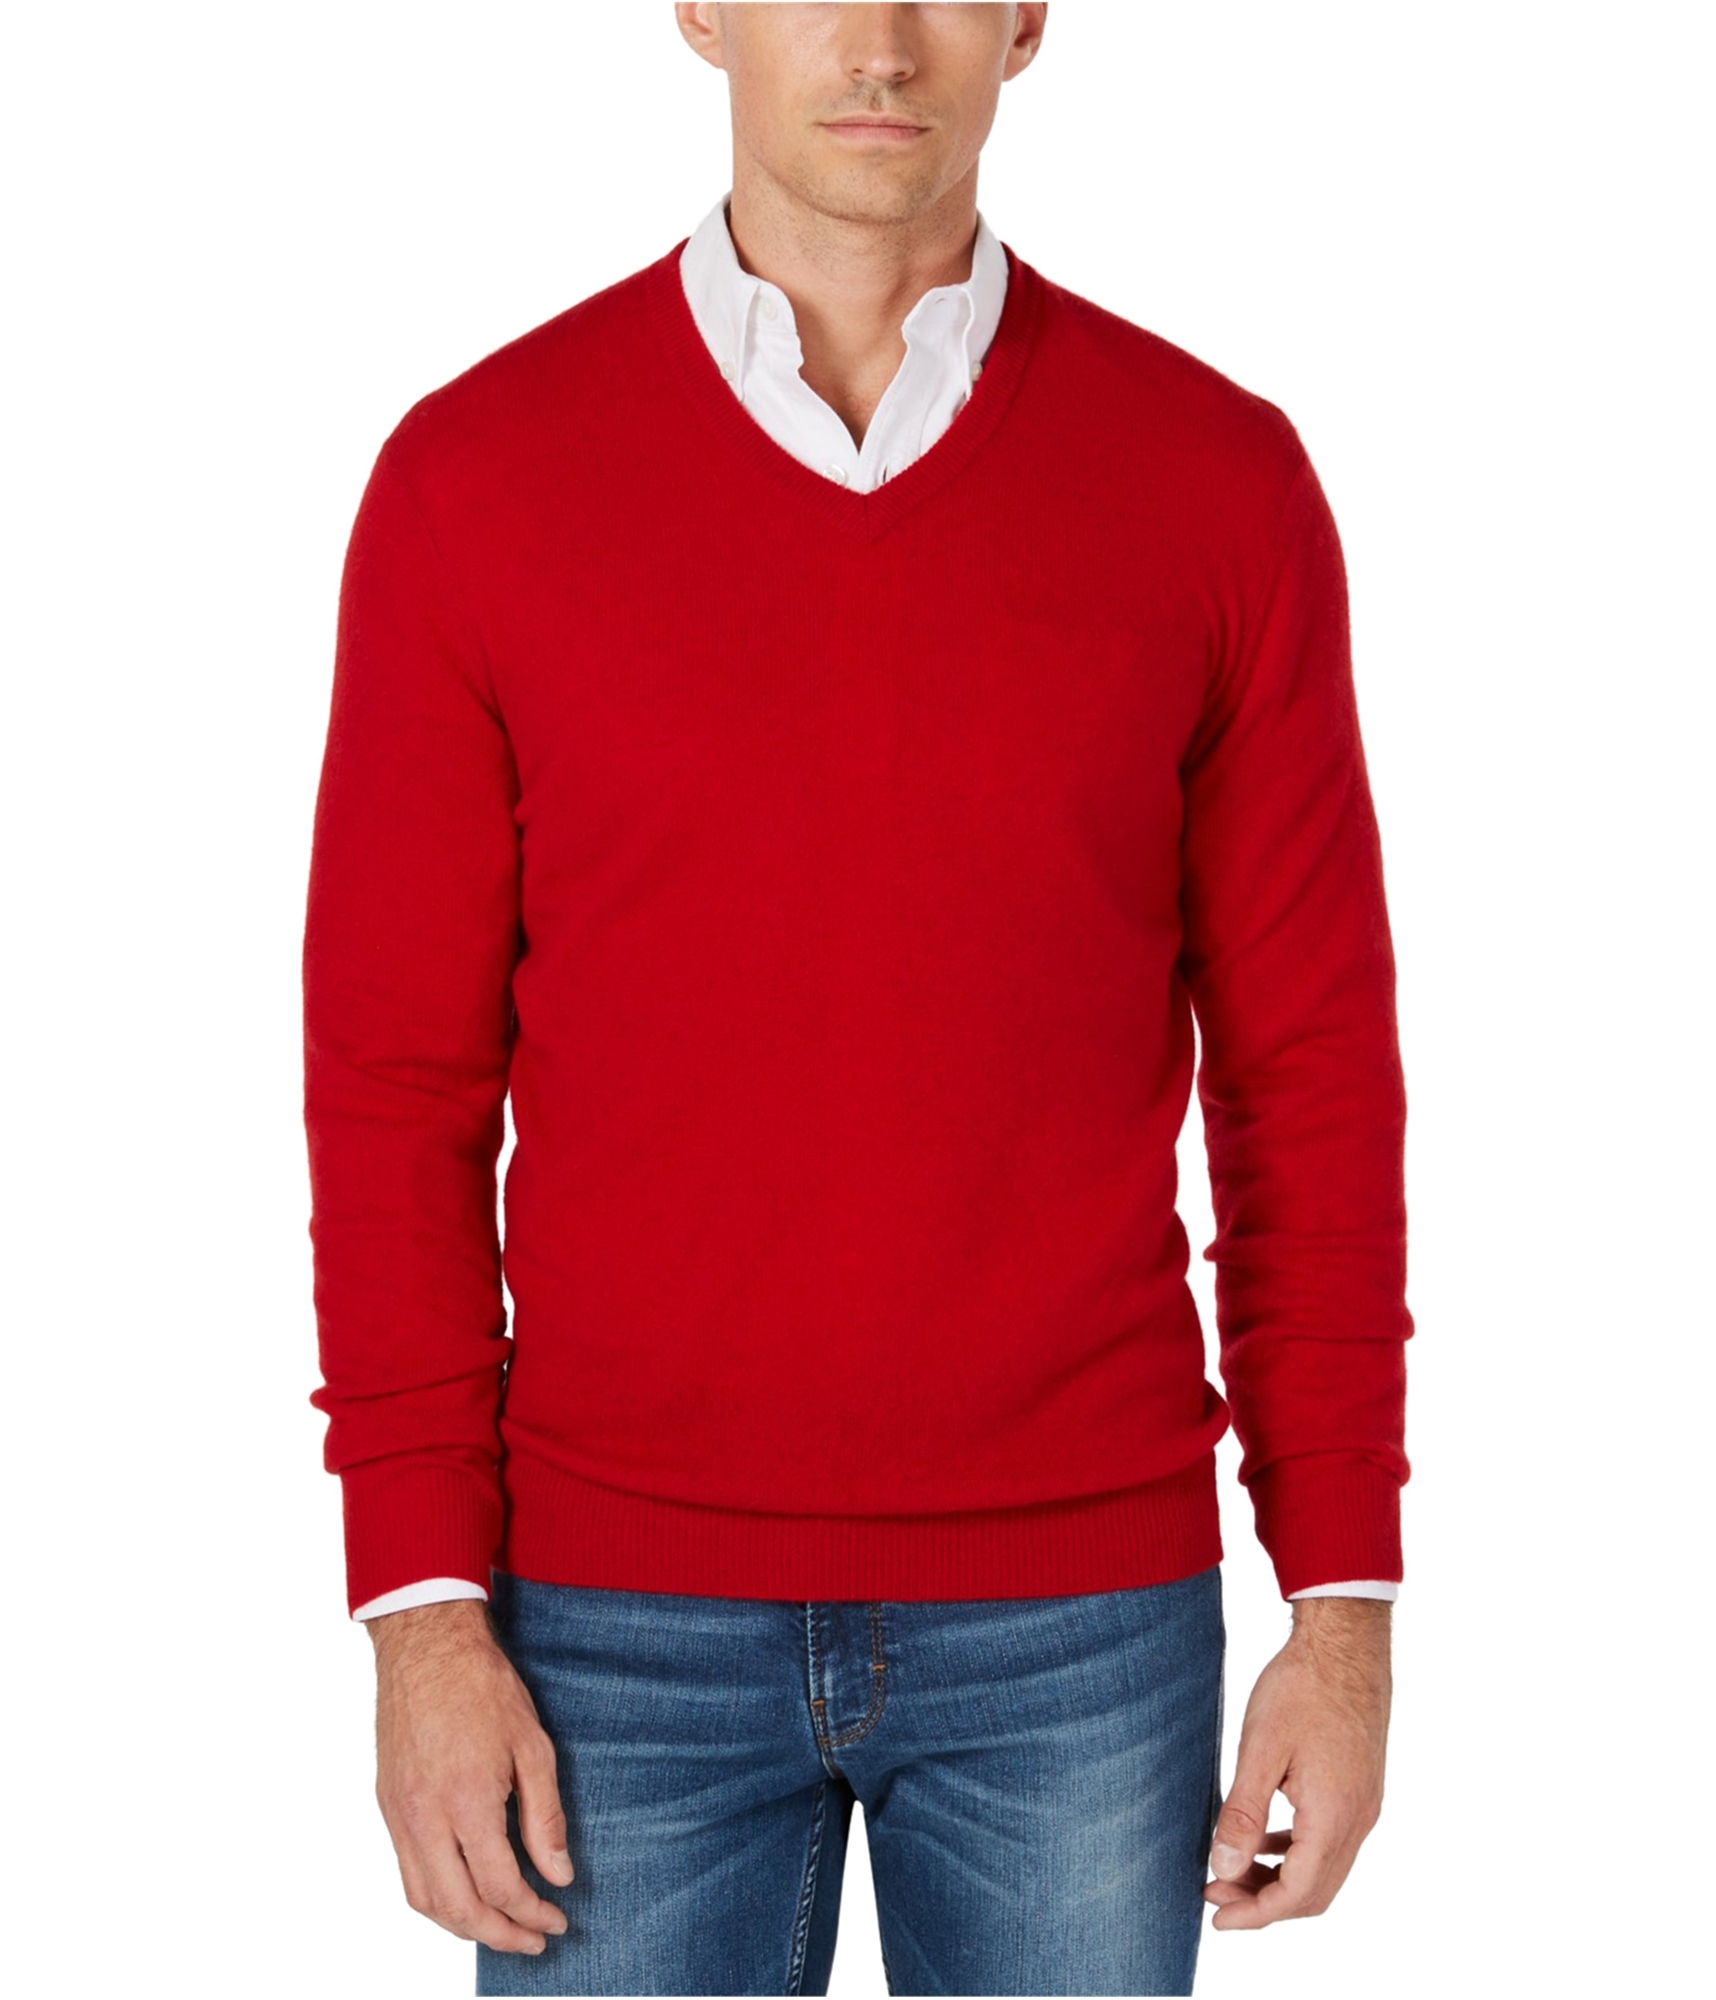 Club Room Mens Cashmere Knit Sweater, Red, Large | eBay